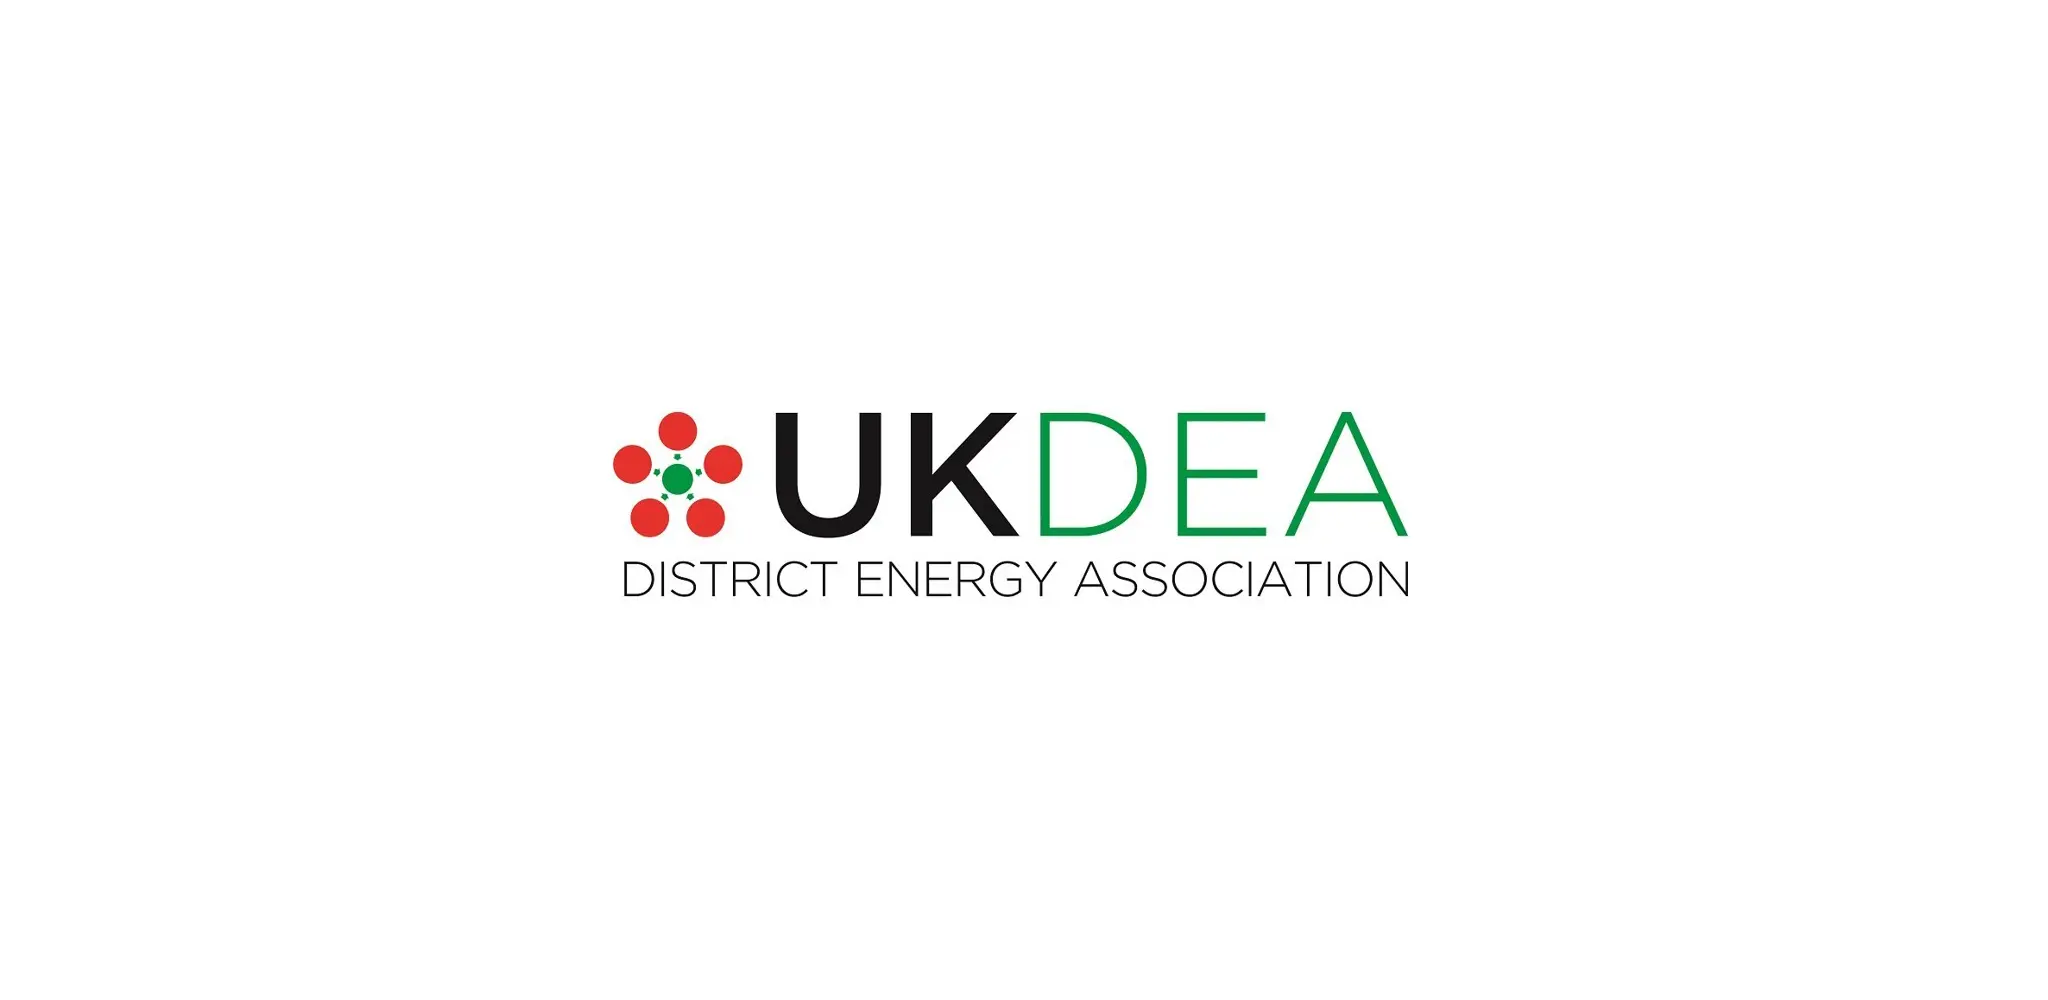 Rapid Energy Becomes a Proud Member of The UKDEA